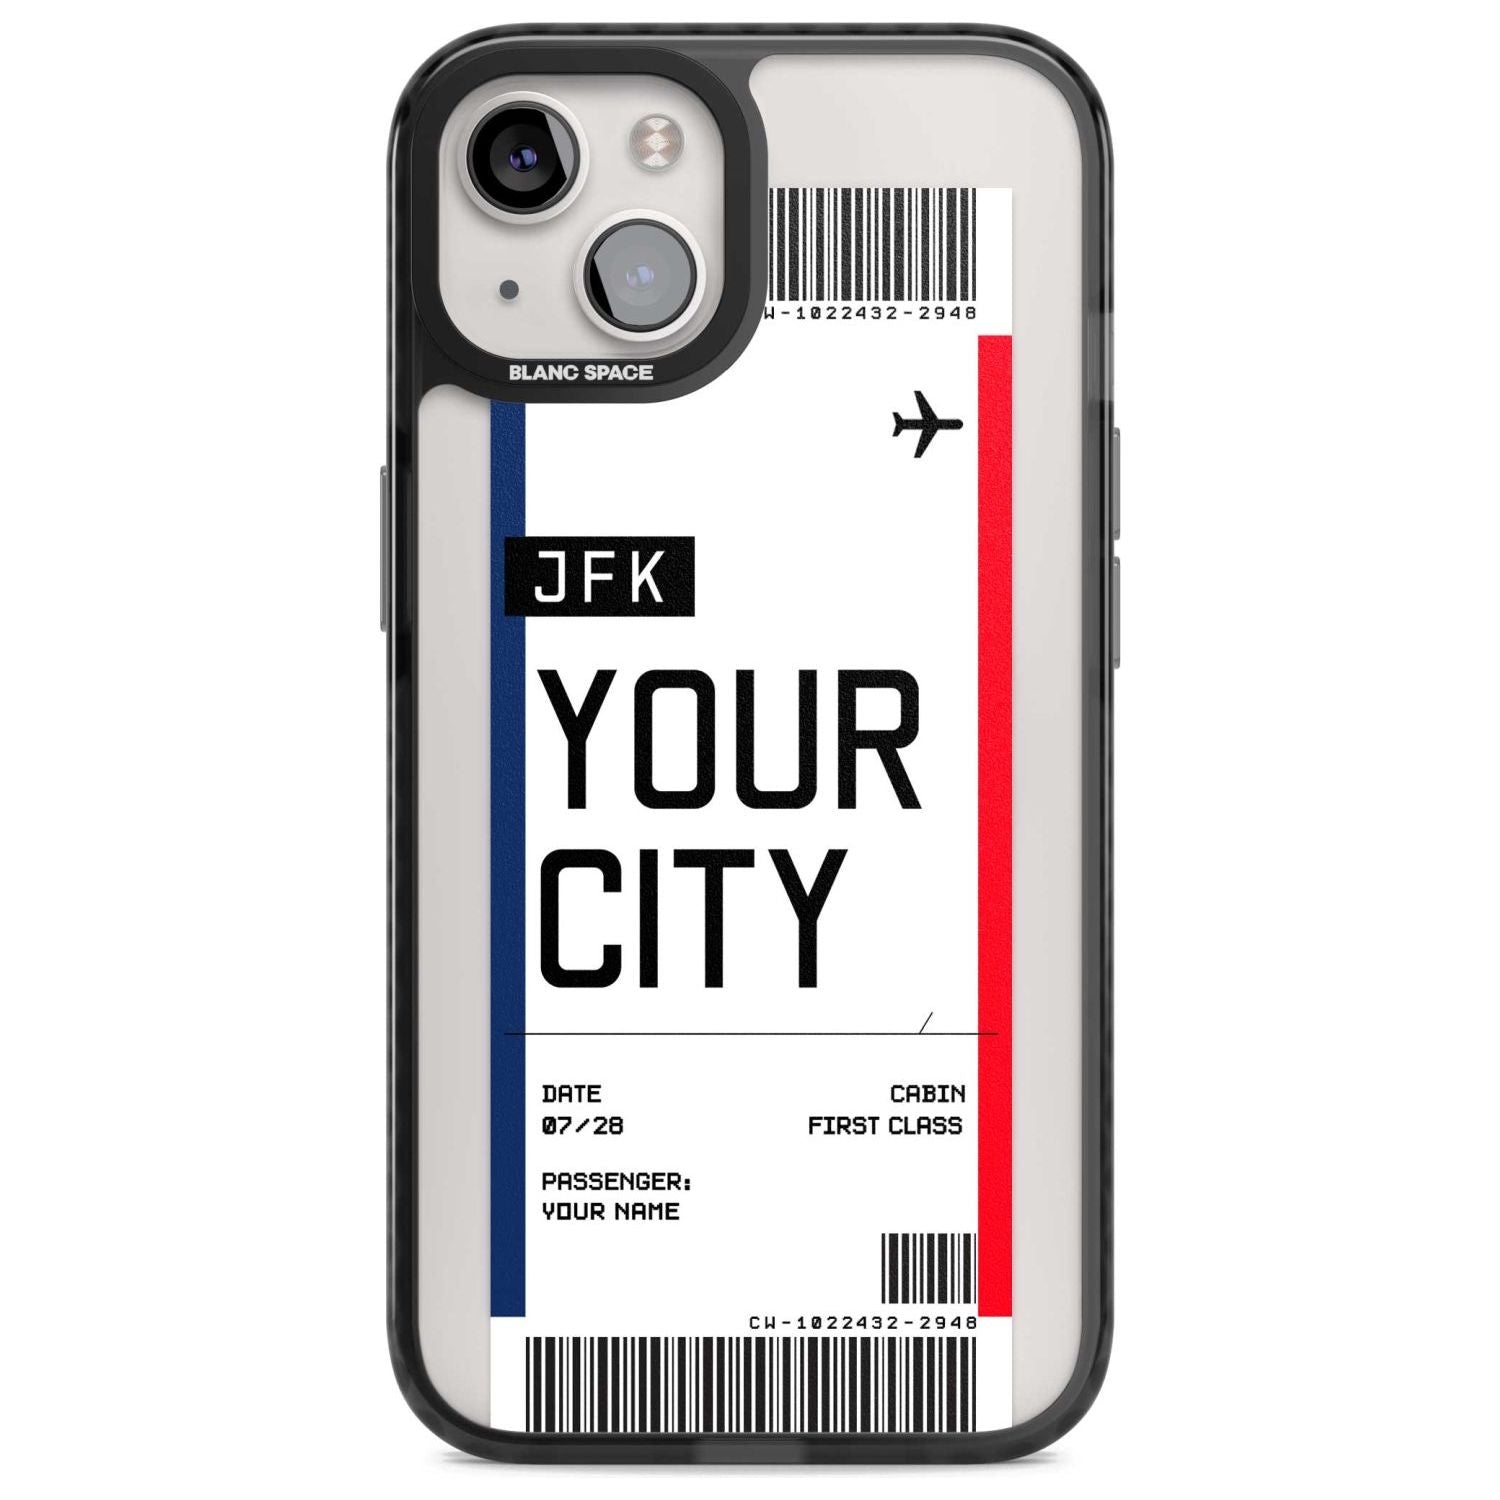 Personalised Create Your Own Boarding Pass Ticket Custom Phone Case iPhone 15 Plus / Magsafe Black Impact Case,iPhone 15 / Magsafe Black Impact Case,iPhone 14 Plus / Magsafe Black Impact Case,iPhone 14 / Magsafe Black Impact Case,iPhone 13 / Magsafe Black Impact Case Blanc Space